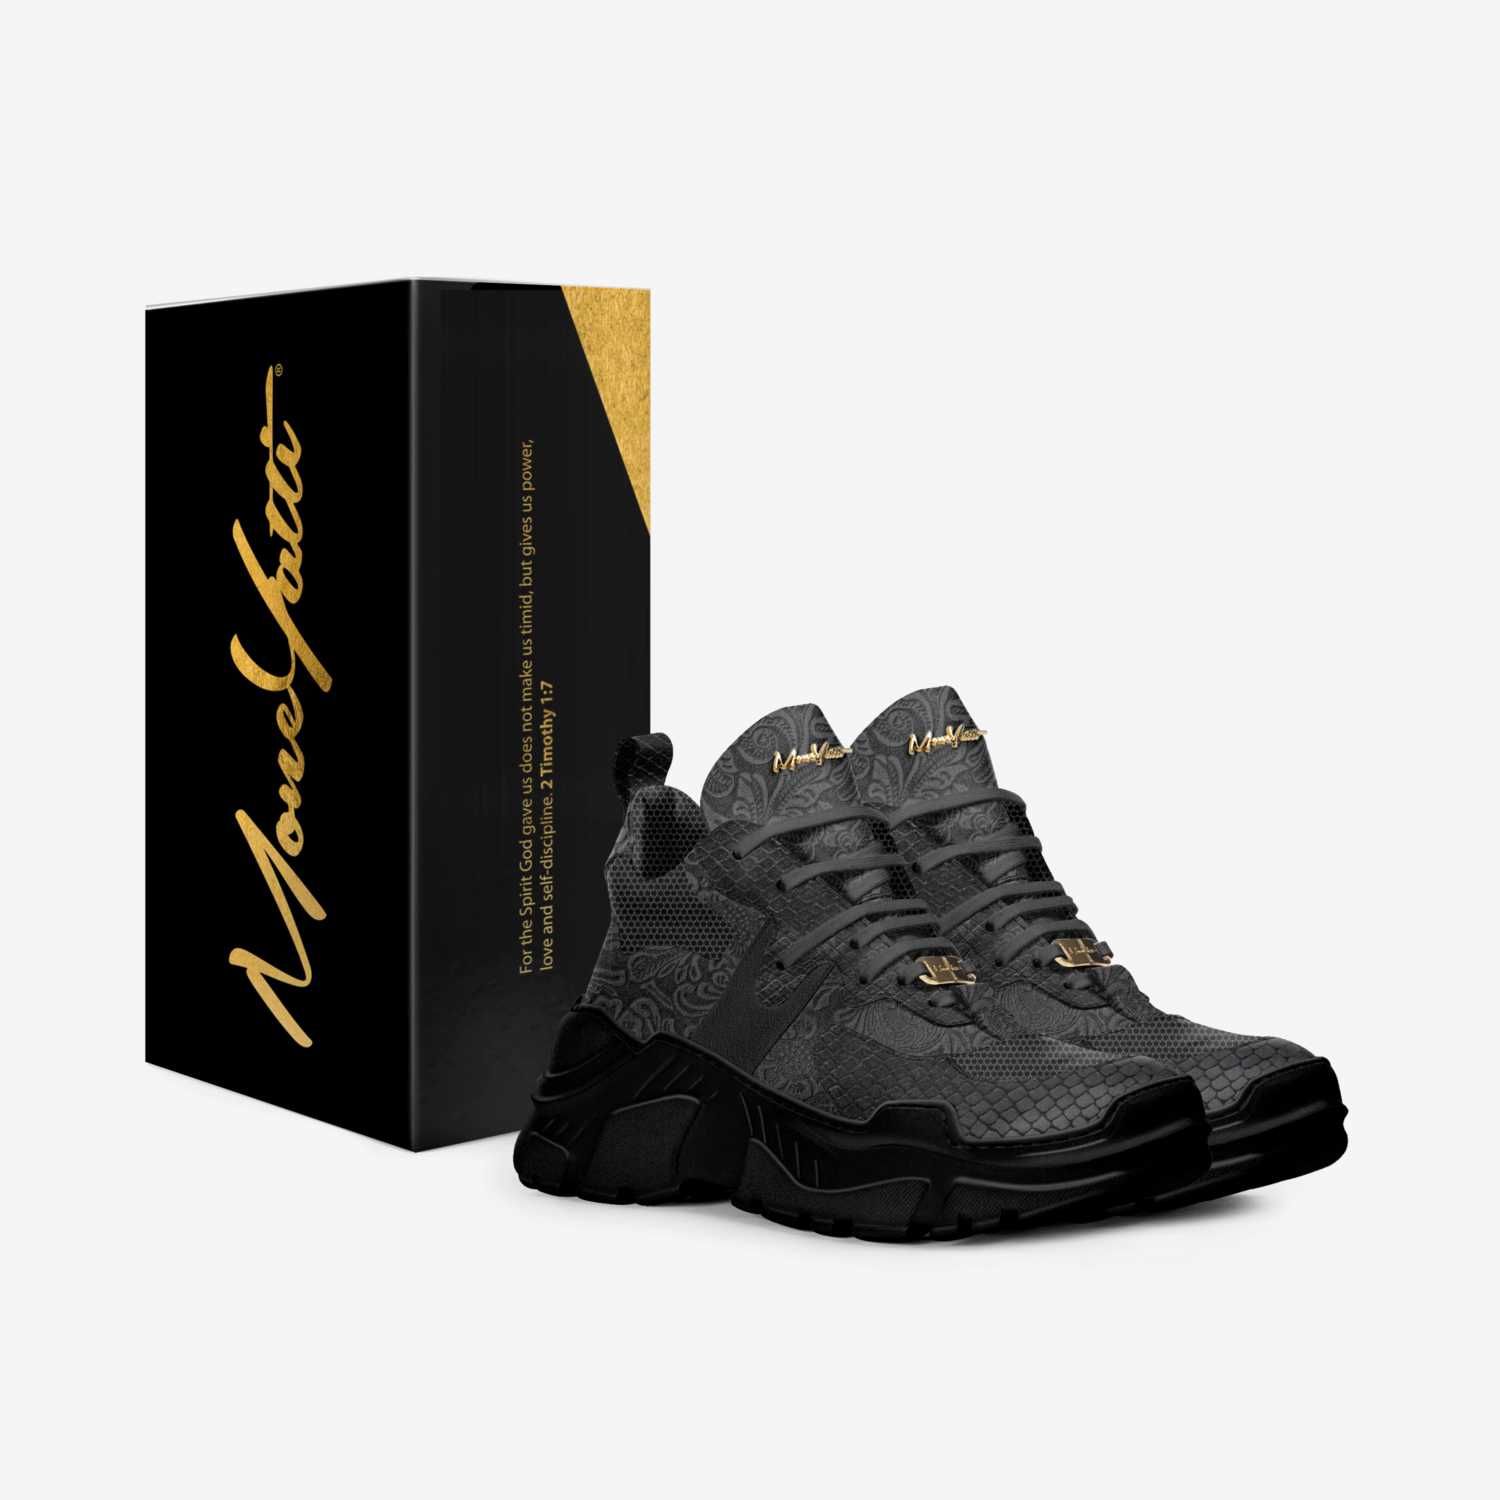 Masterpiece 015 custom made in Italy shoes by Moneyatti Brand | Box view